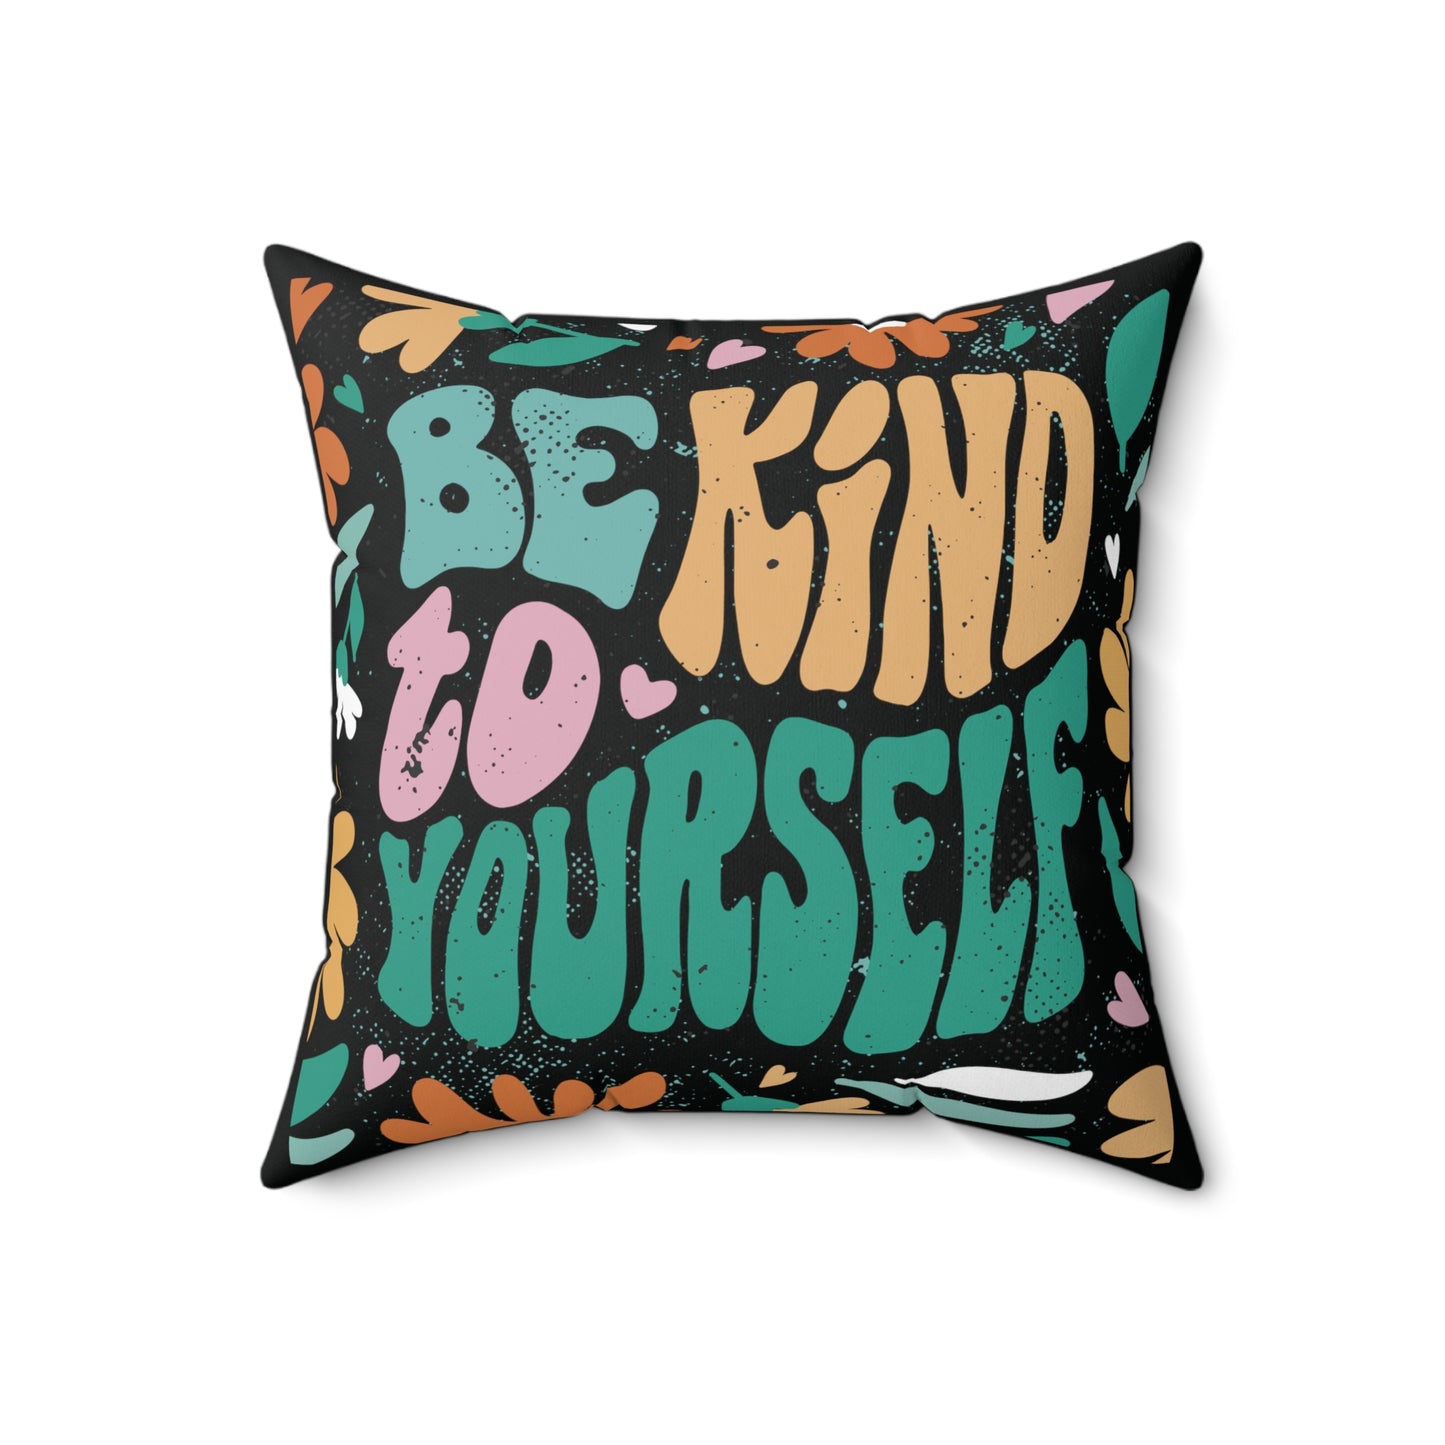 Be Kind to yourself Square Pillow